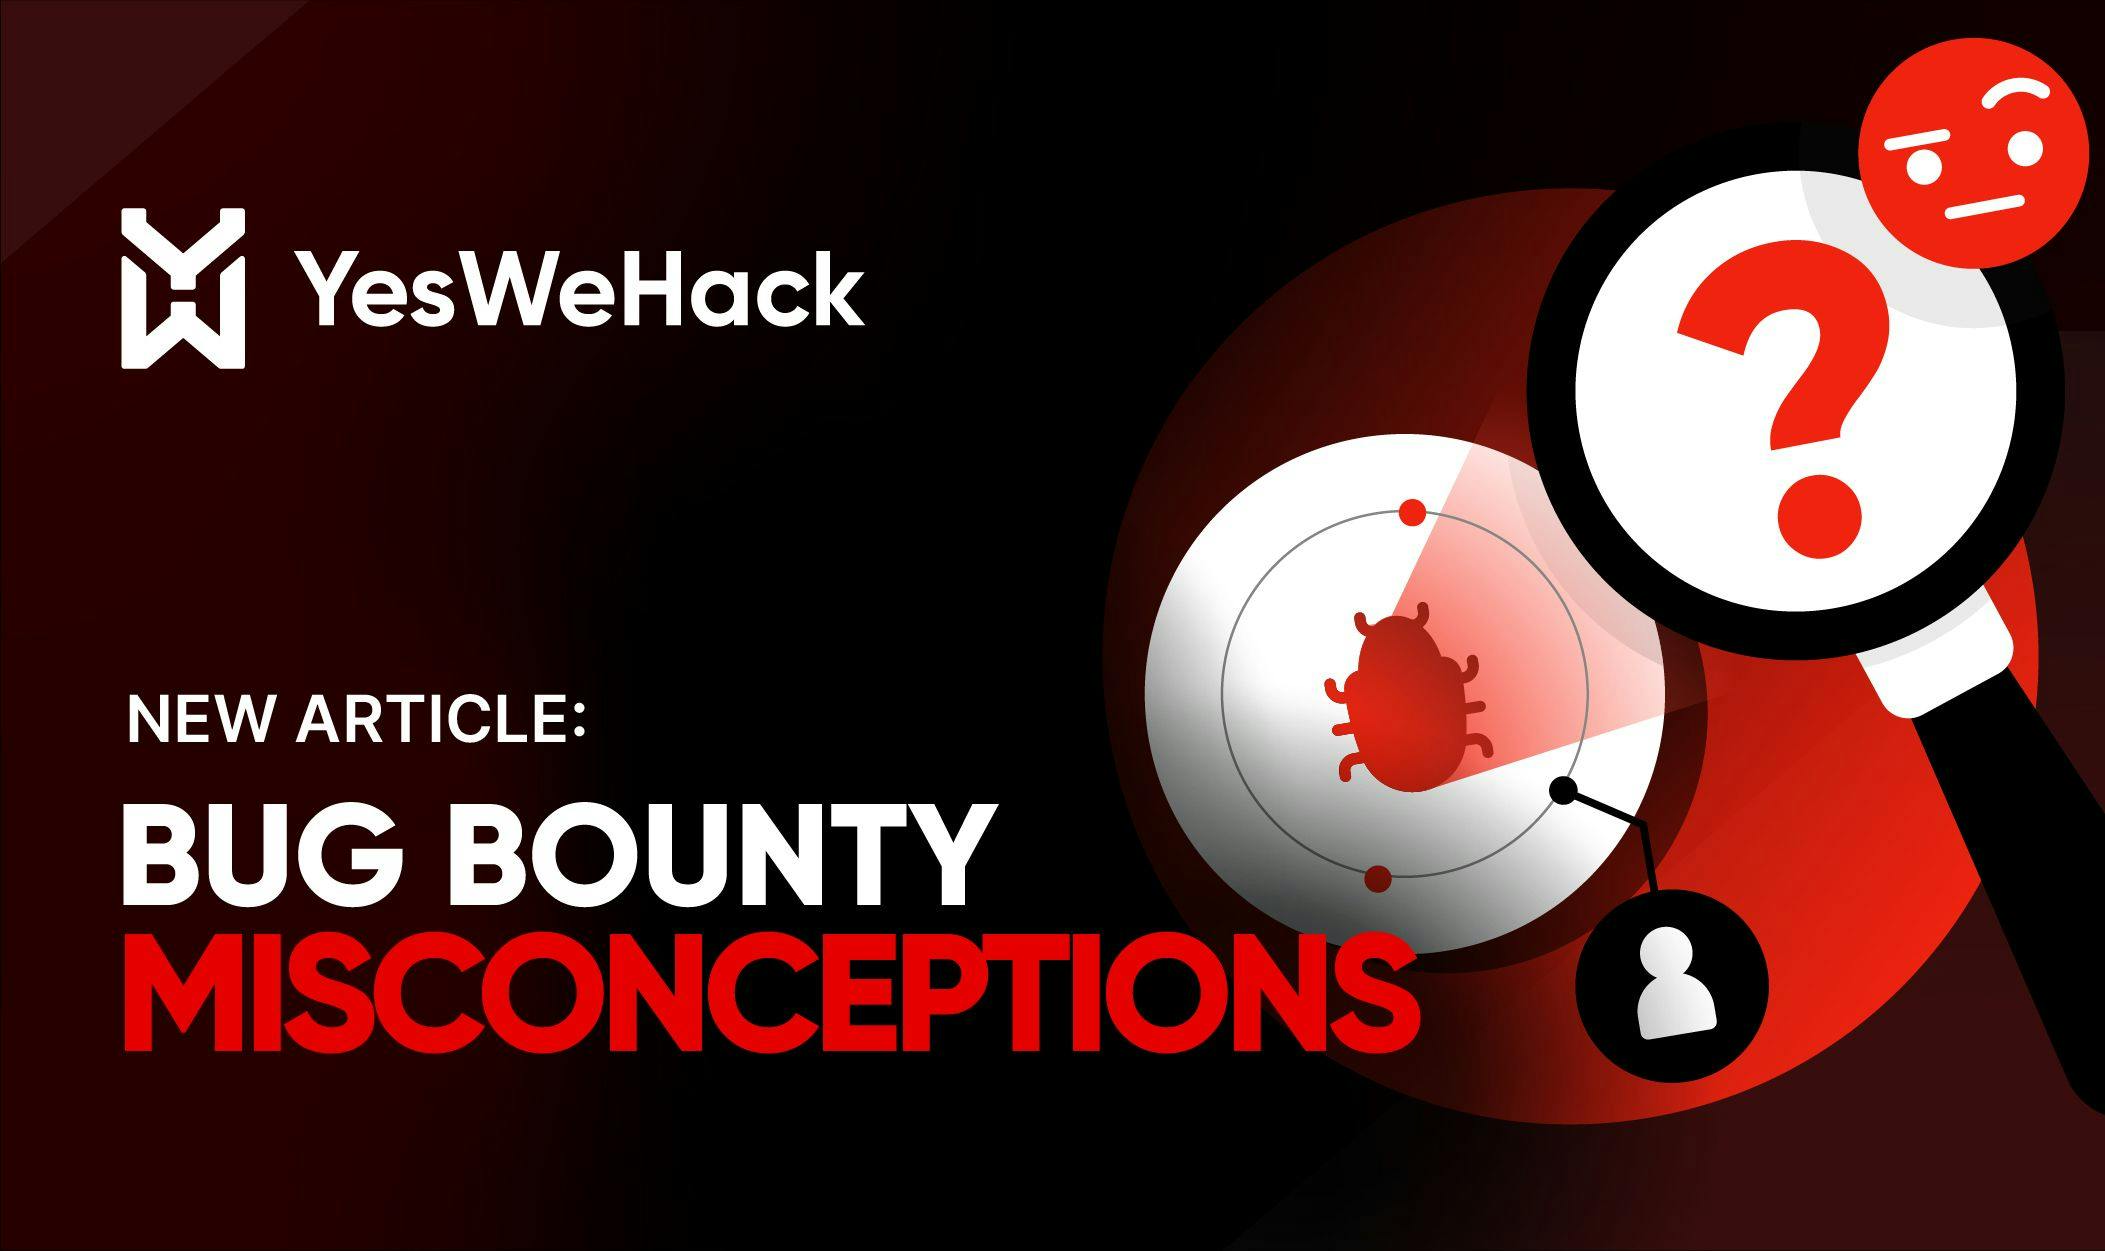 Bug bounty misconceptions 